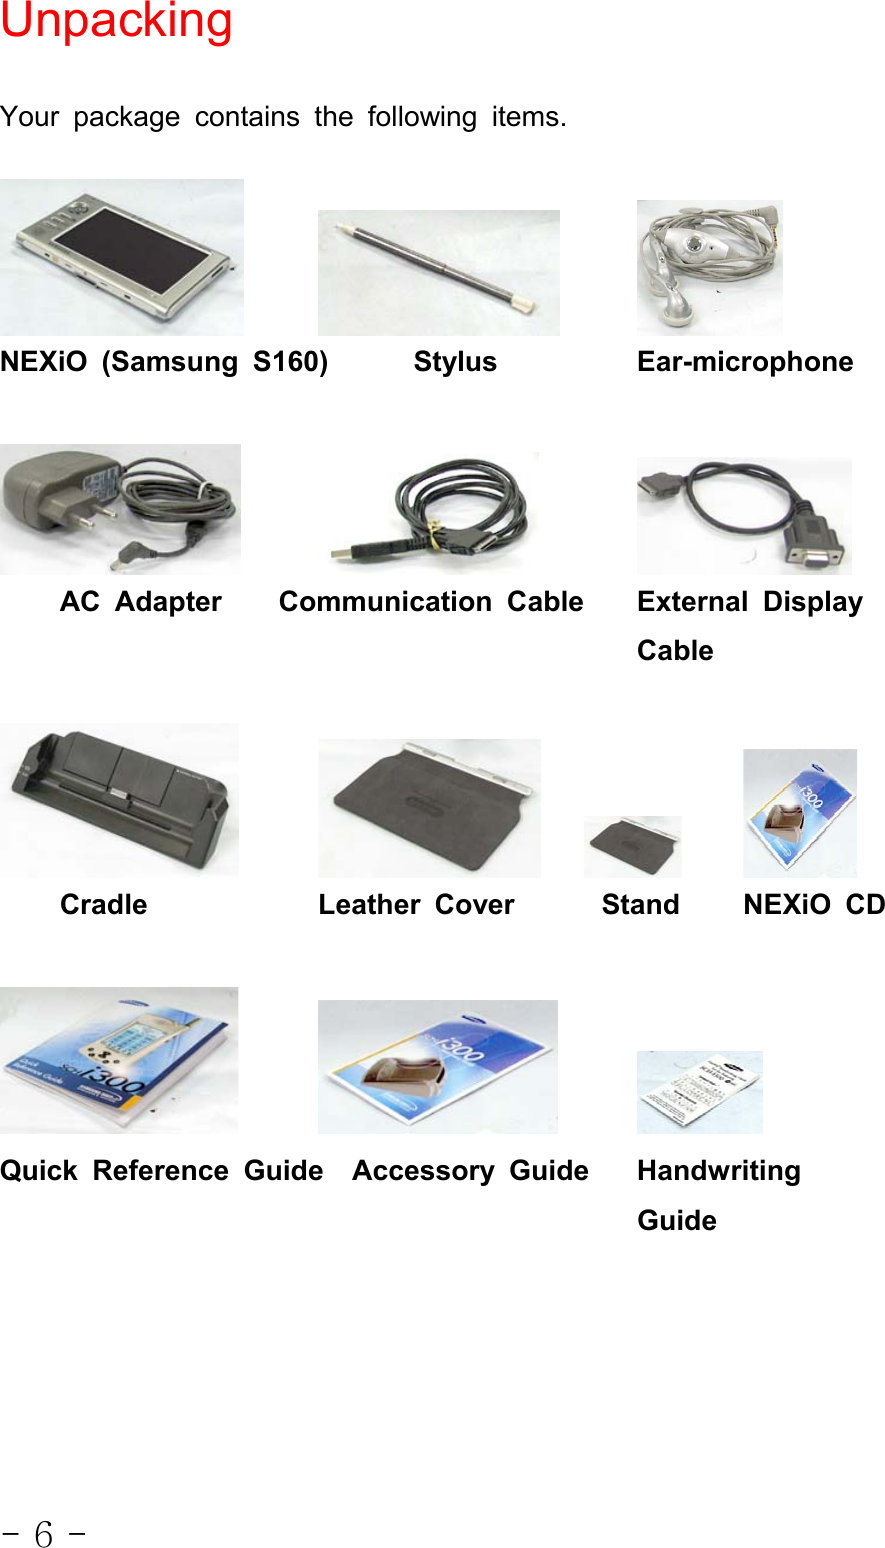 - 6 -UnpackingYour package contains the following items.NEXiO (Samsung S160) Stylus Ear-microphoneAC Adapter Communication Cable External DisplayCableCradle Leather Cover Stand NEXiO CDQuick Reference Guide Accessory Guide HandwritingGuide